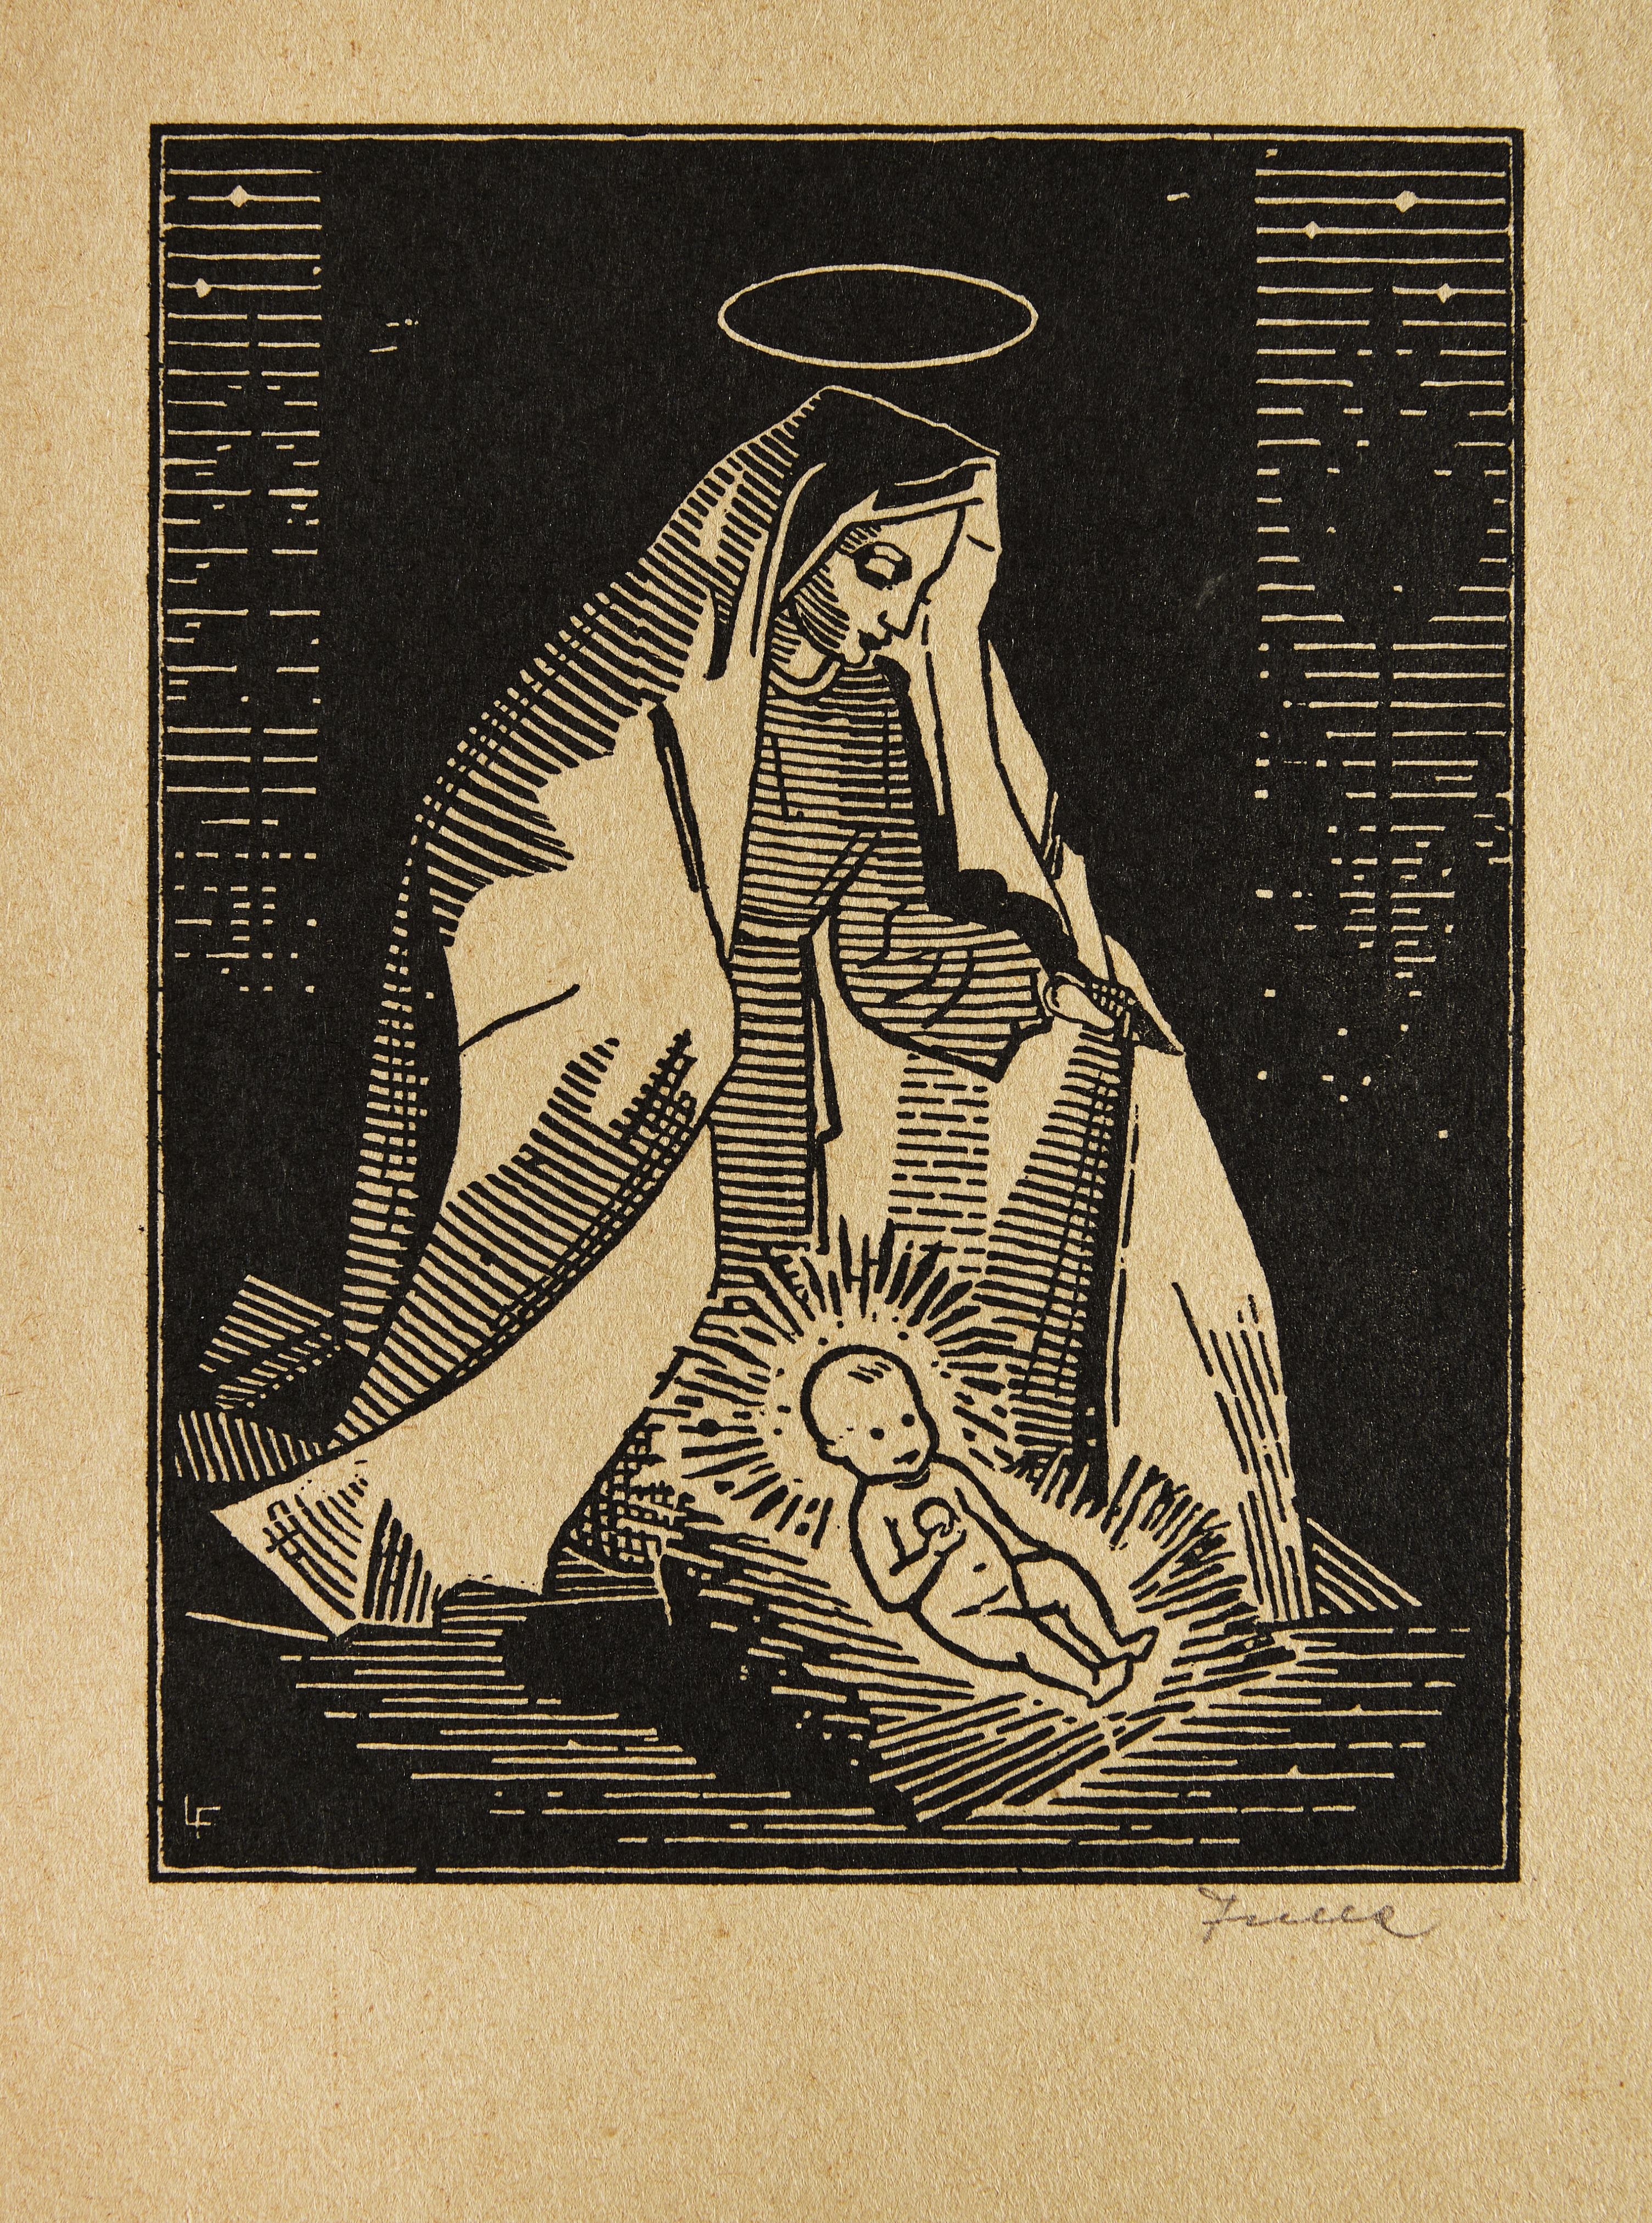 Artwork by Ludovit Fulla, NARODENIE, Made of woodcut on paper